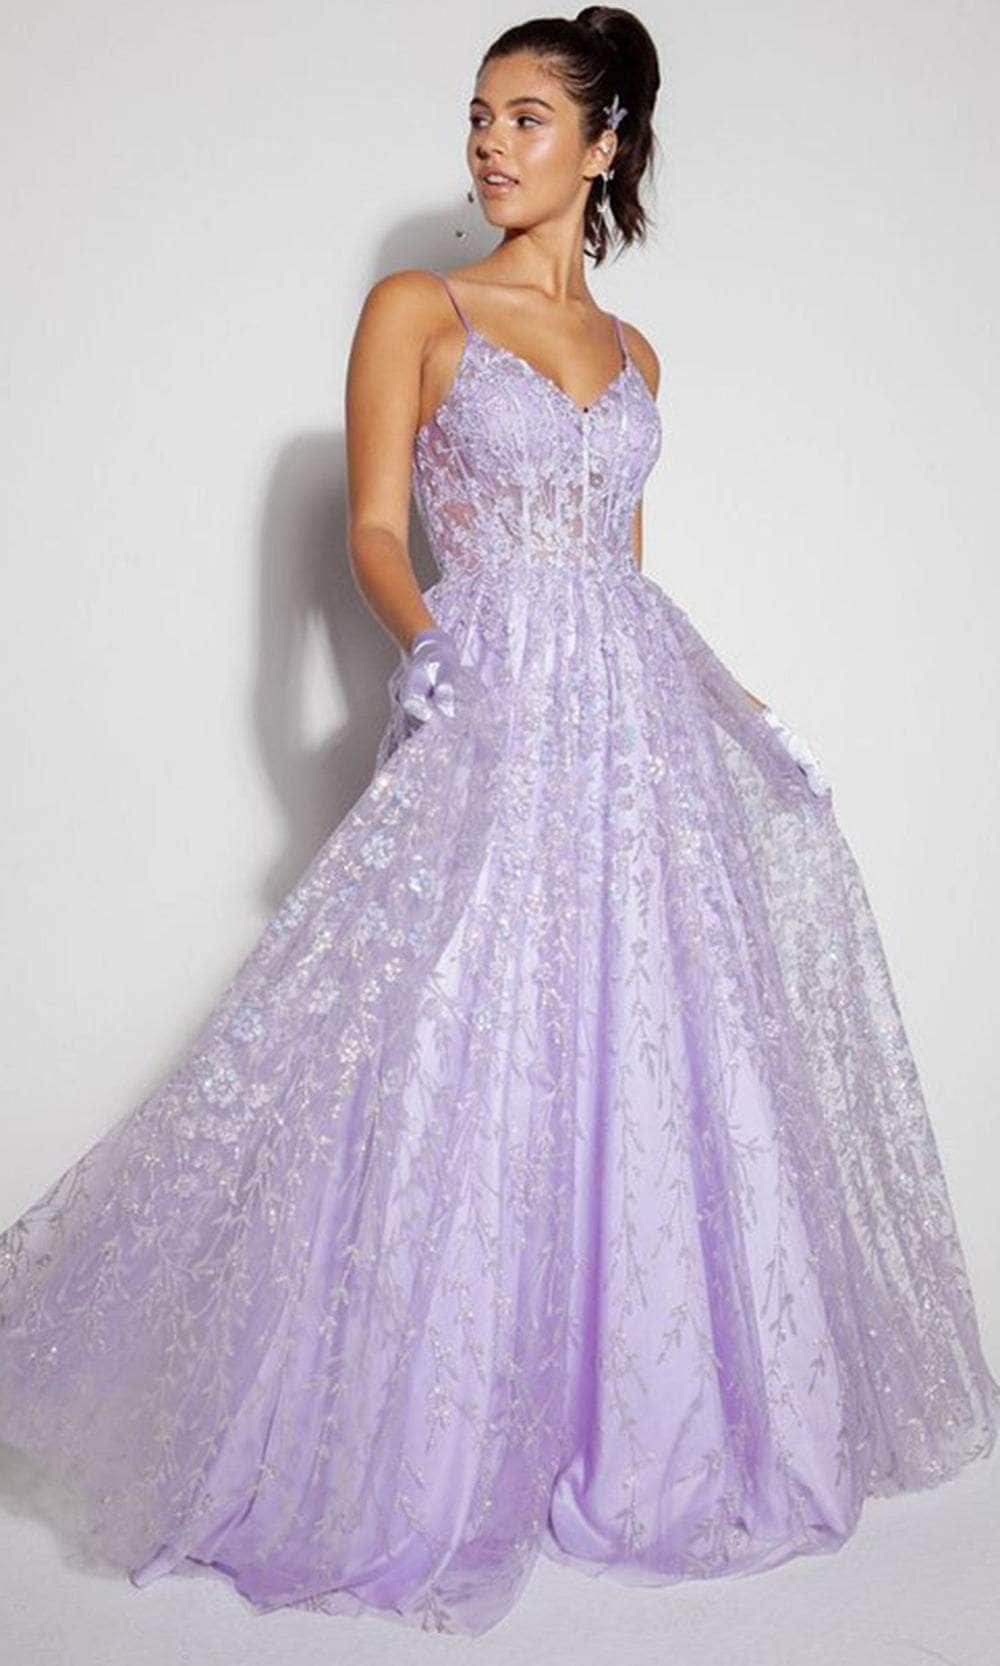 Eureka Fashion 9908 - V-Neck Sheer Corset Prom Gown Prom Dresses XS / Lilac/Silver